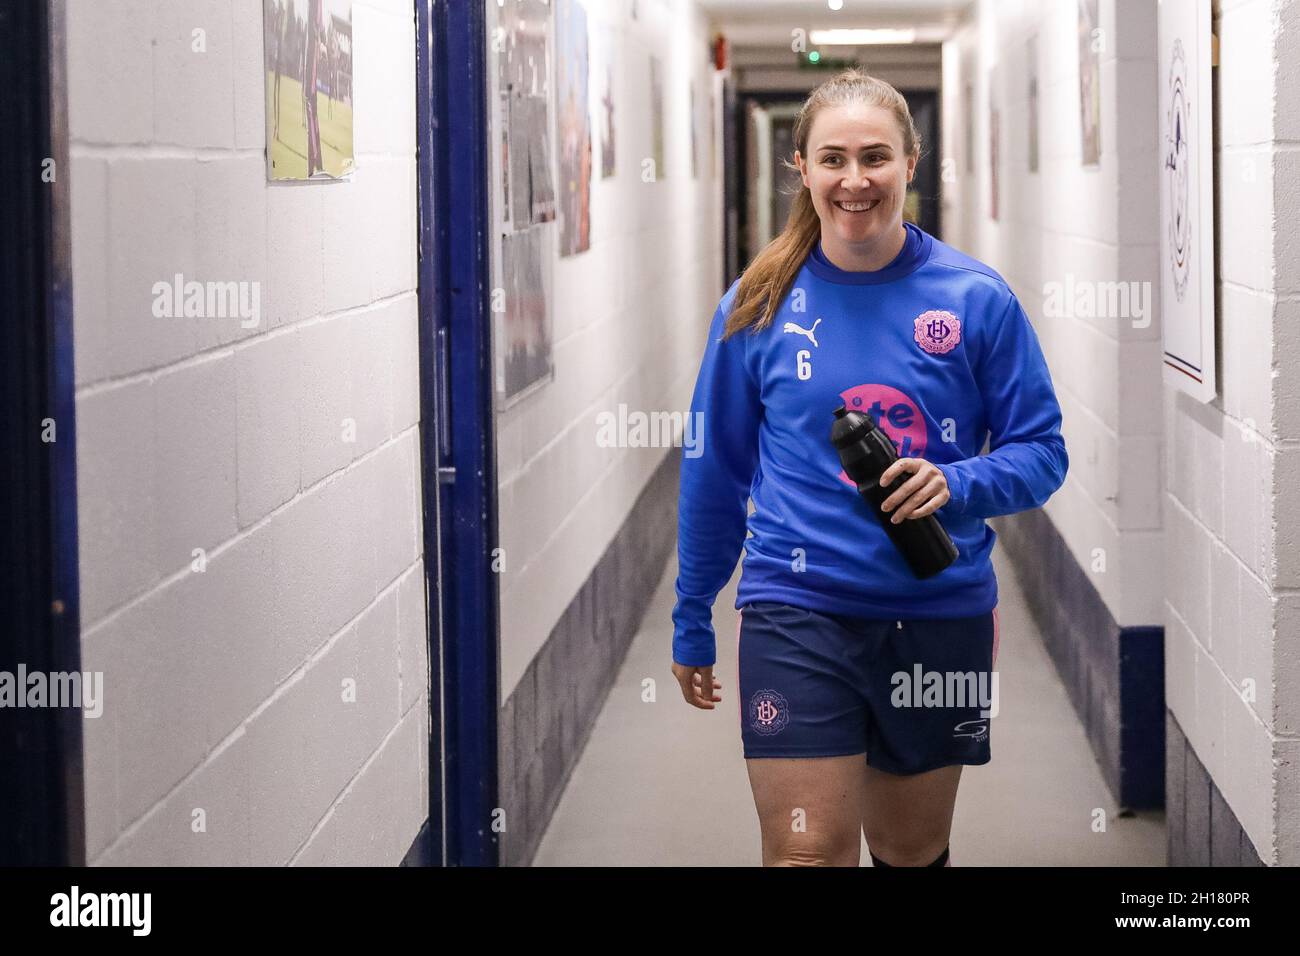 London, UK. 17th Oct, 2021. London, England, October 17th 20 Sarah Walters (6 Dulwich Hamlet) prior to the London and South East Regional Womens Premier game between Dulwich Hamlet and Ashford at Champion Hill in London, England. Liam Asman/SPP Credit: SPP Sport Press Photo. /Alamy Live News Stock Photo